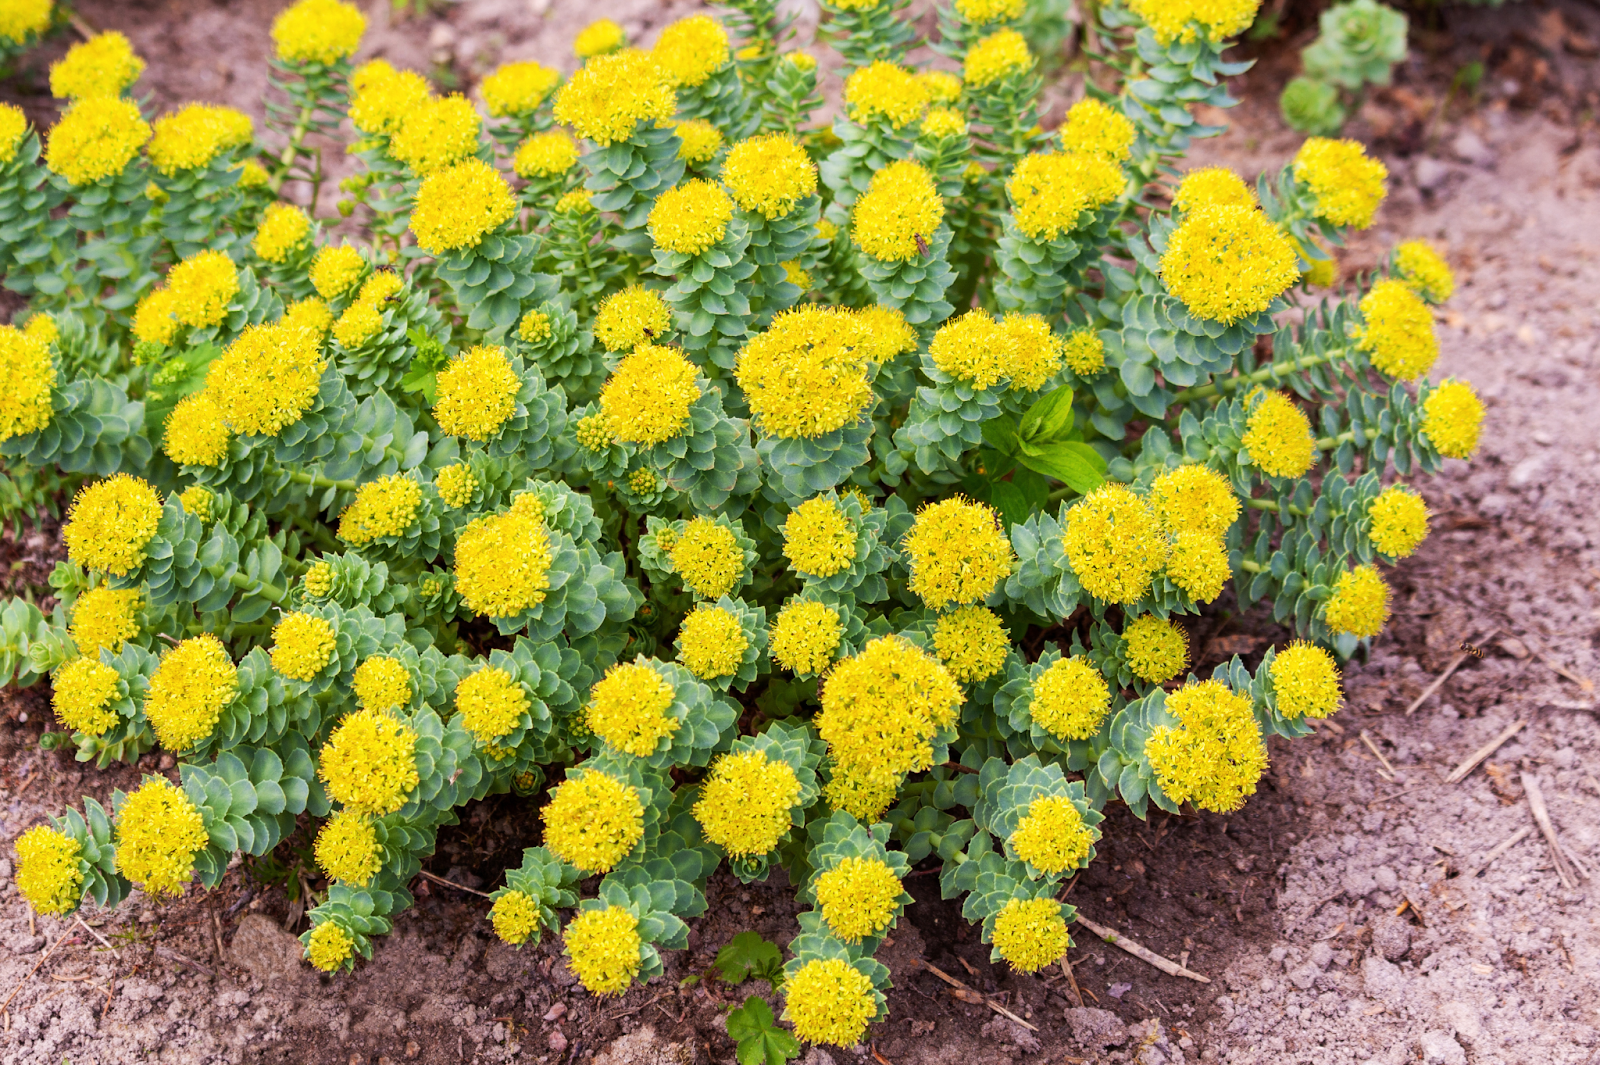 What is Rhodiola Rosea?